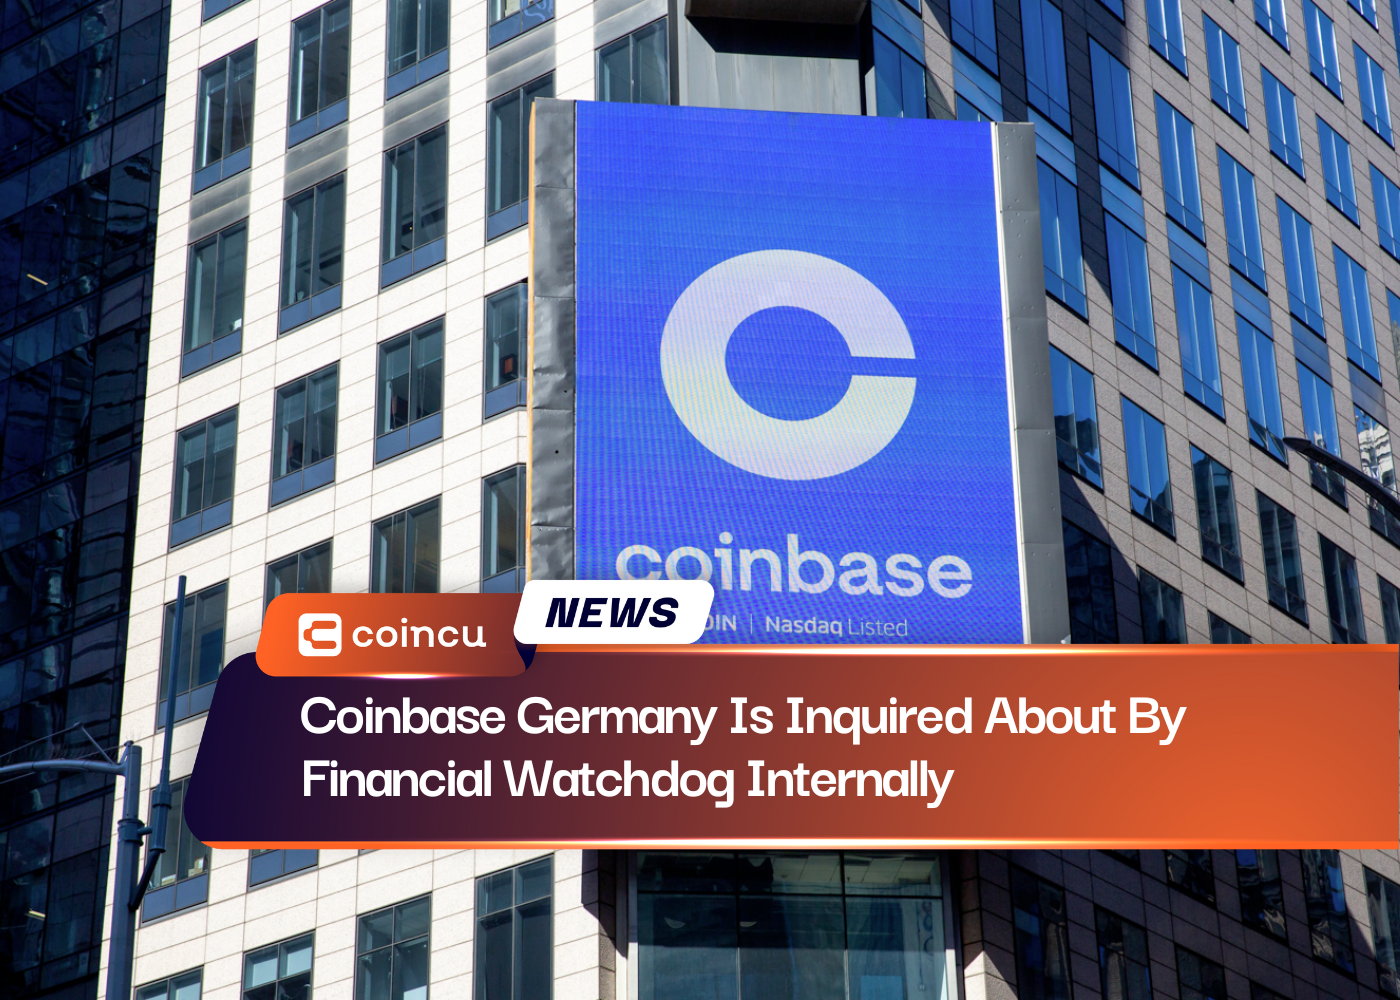 Coinbase Germany Is Inquired About By Financial Watchdog Internally